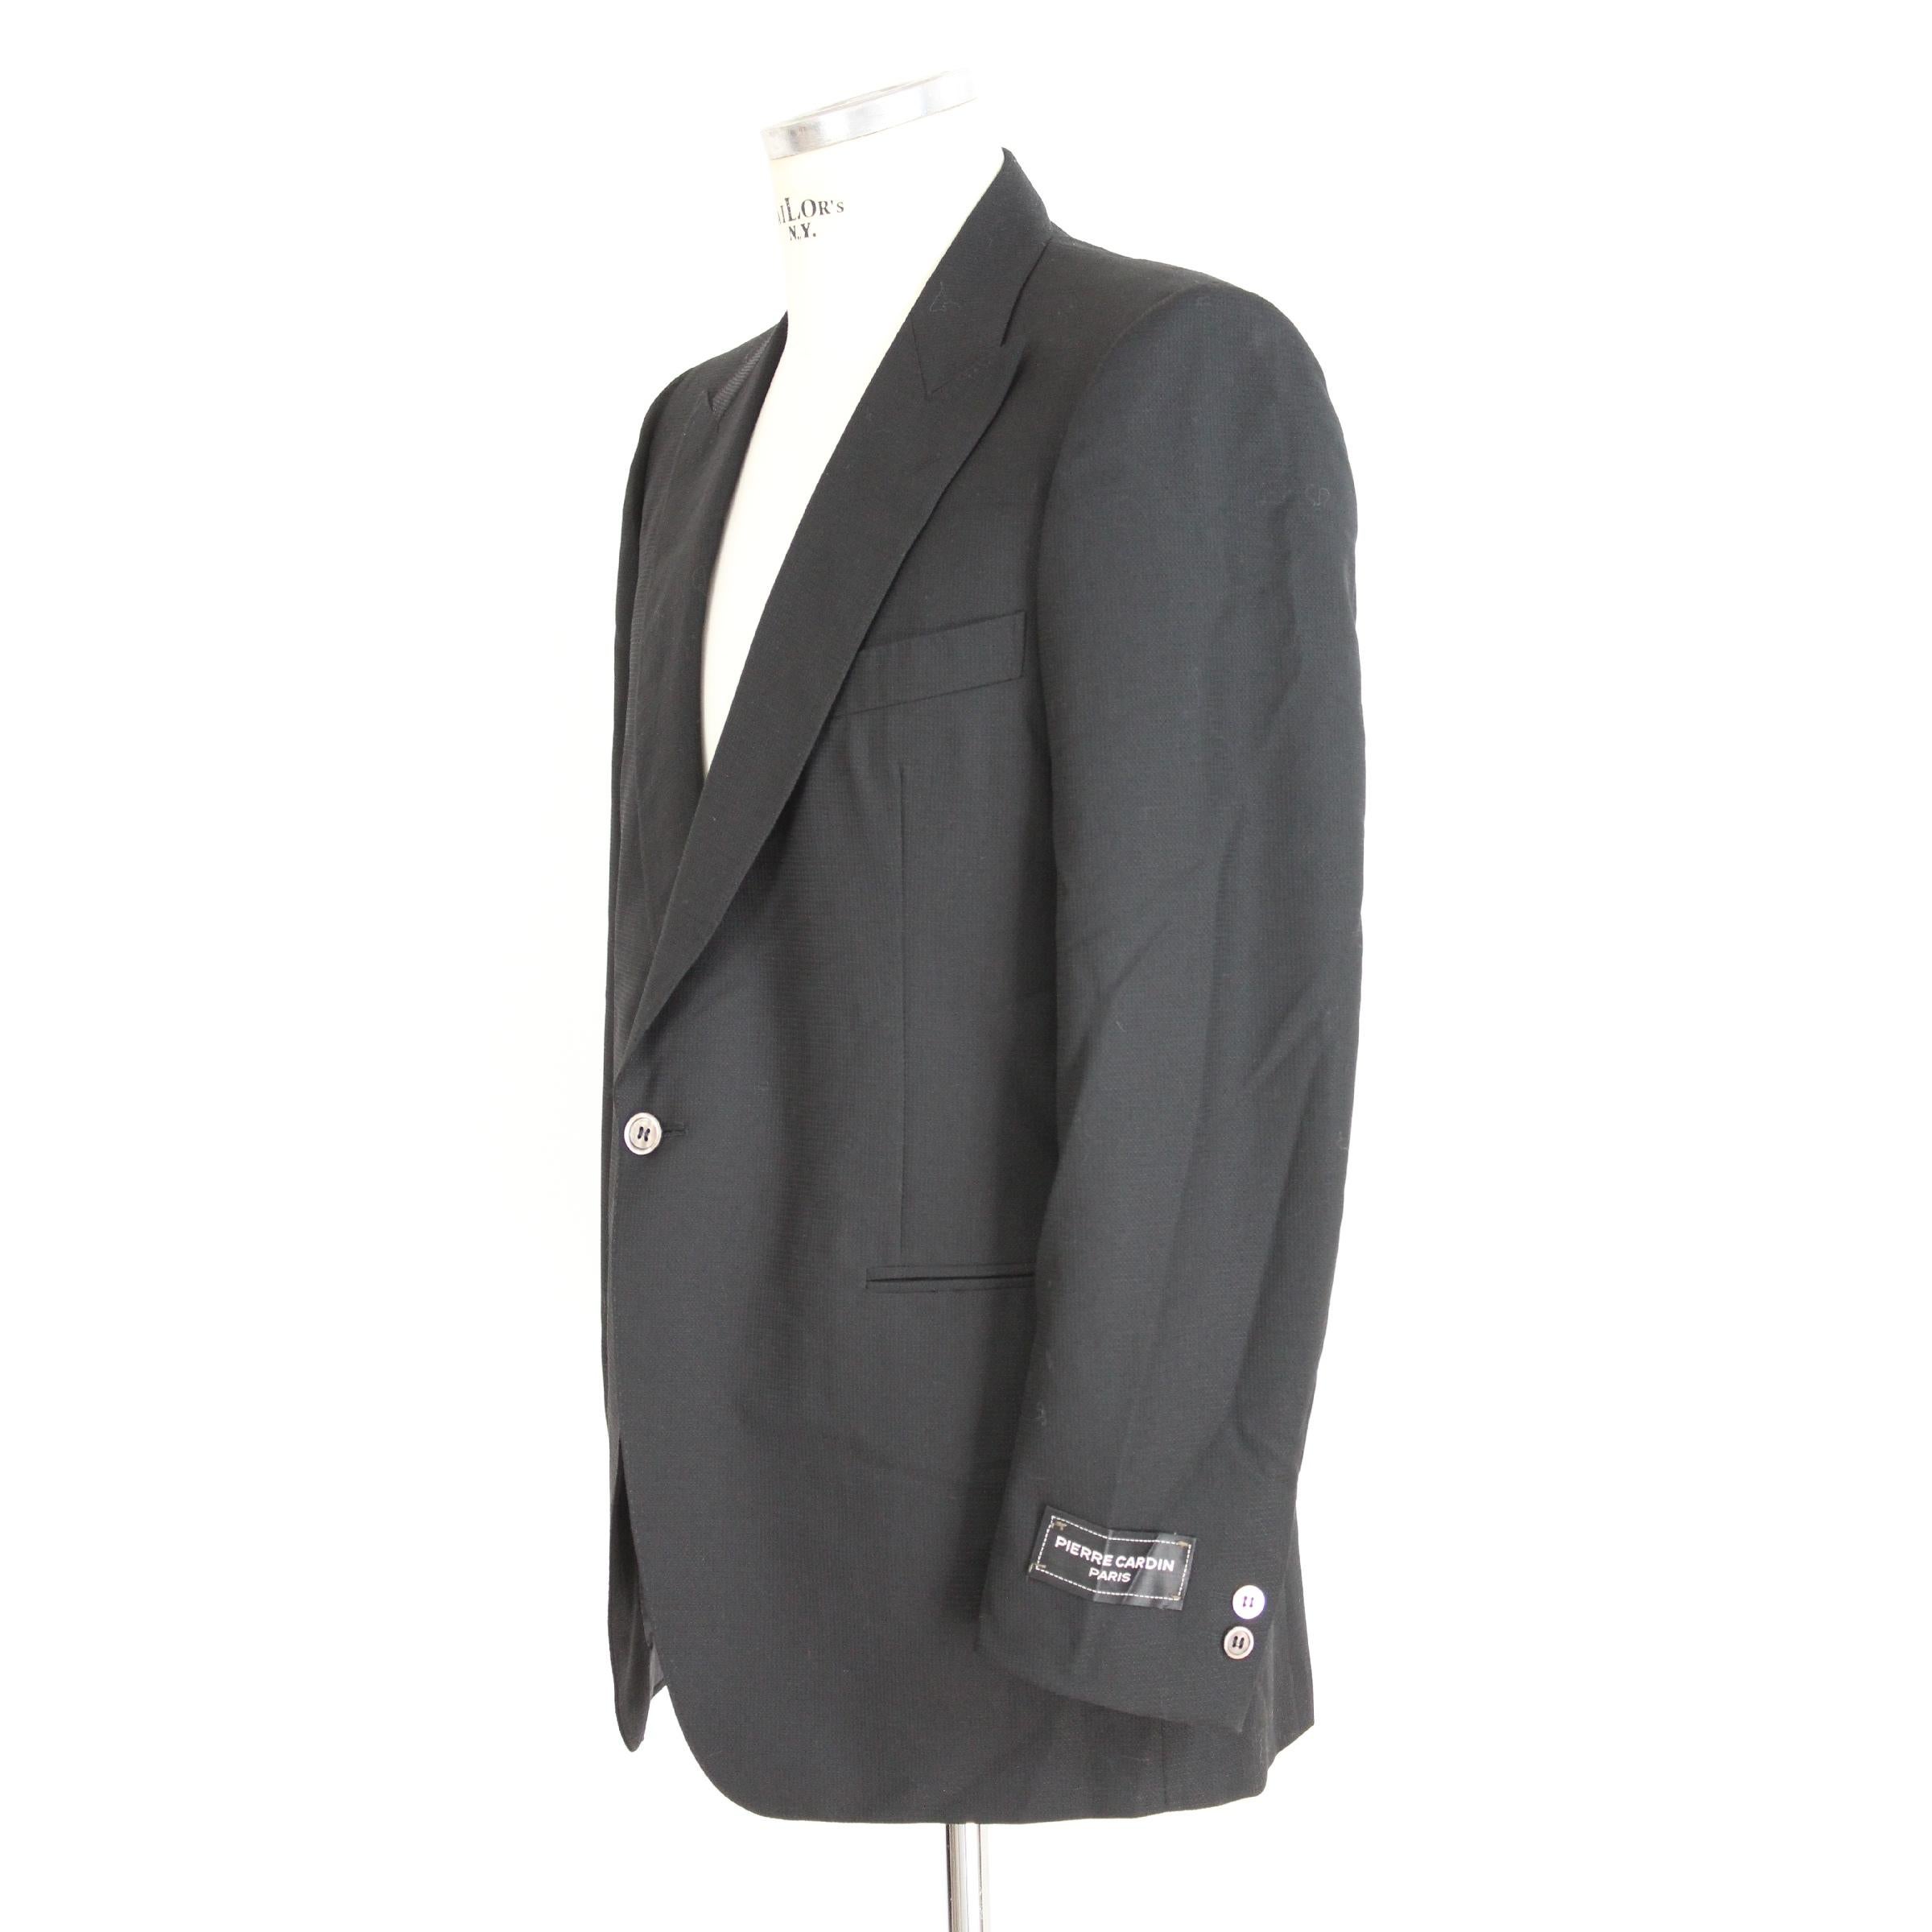 Pierre Cardin evening tuxedo jacket. One button closure with two pockets on the sides and a chest pocket, cotton pique fabric. New without label.

Size 52 It 42 Us 42 Uk

Shoulders: 52 cm
Chest / bust: 53 cm
Sleeves: 62 cm
Length: 84 cm